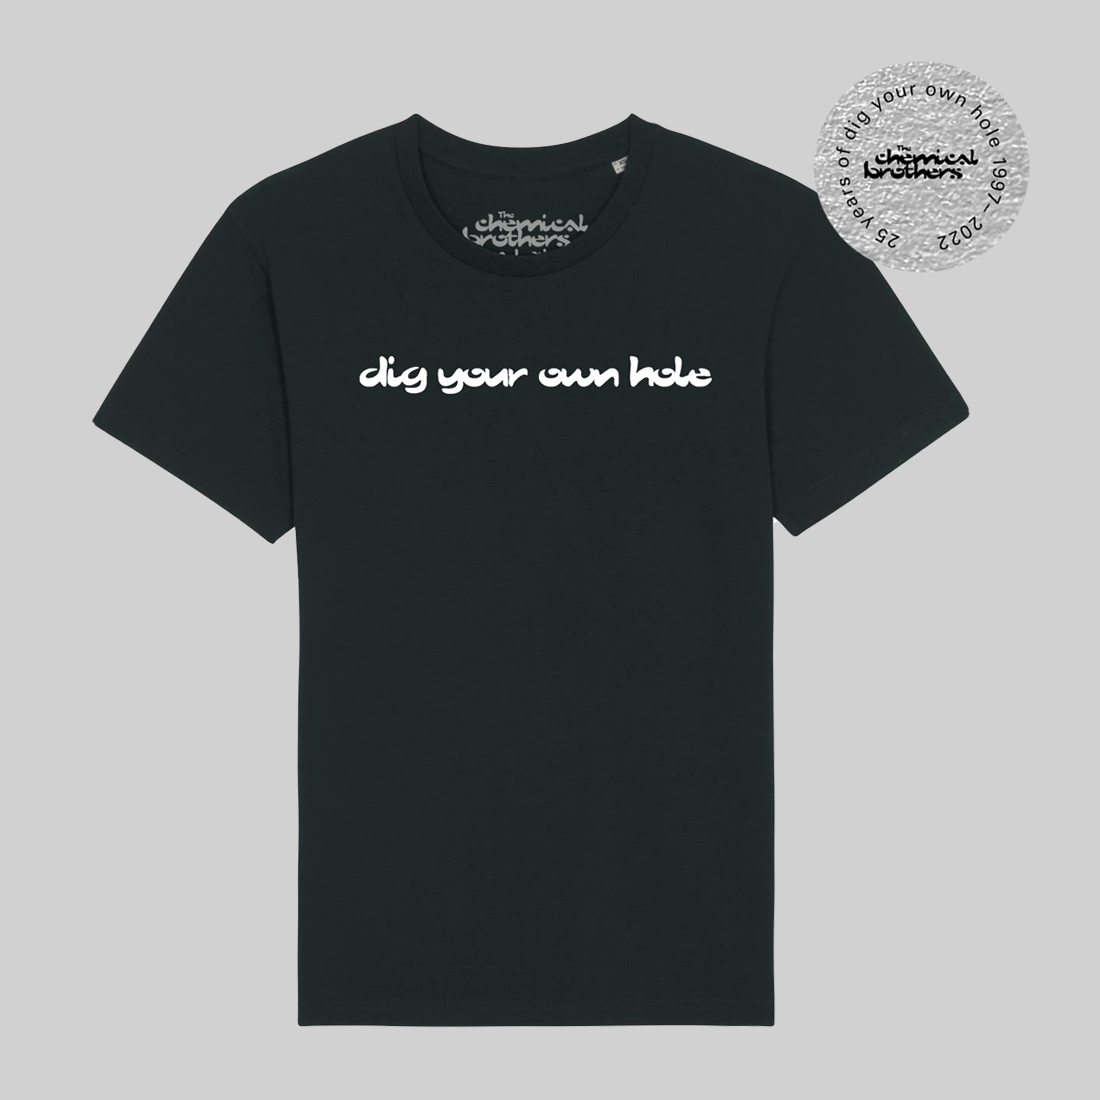 The Chemical Brothers - Dig Your Own Hole Tee